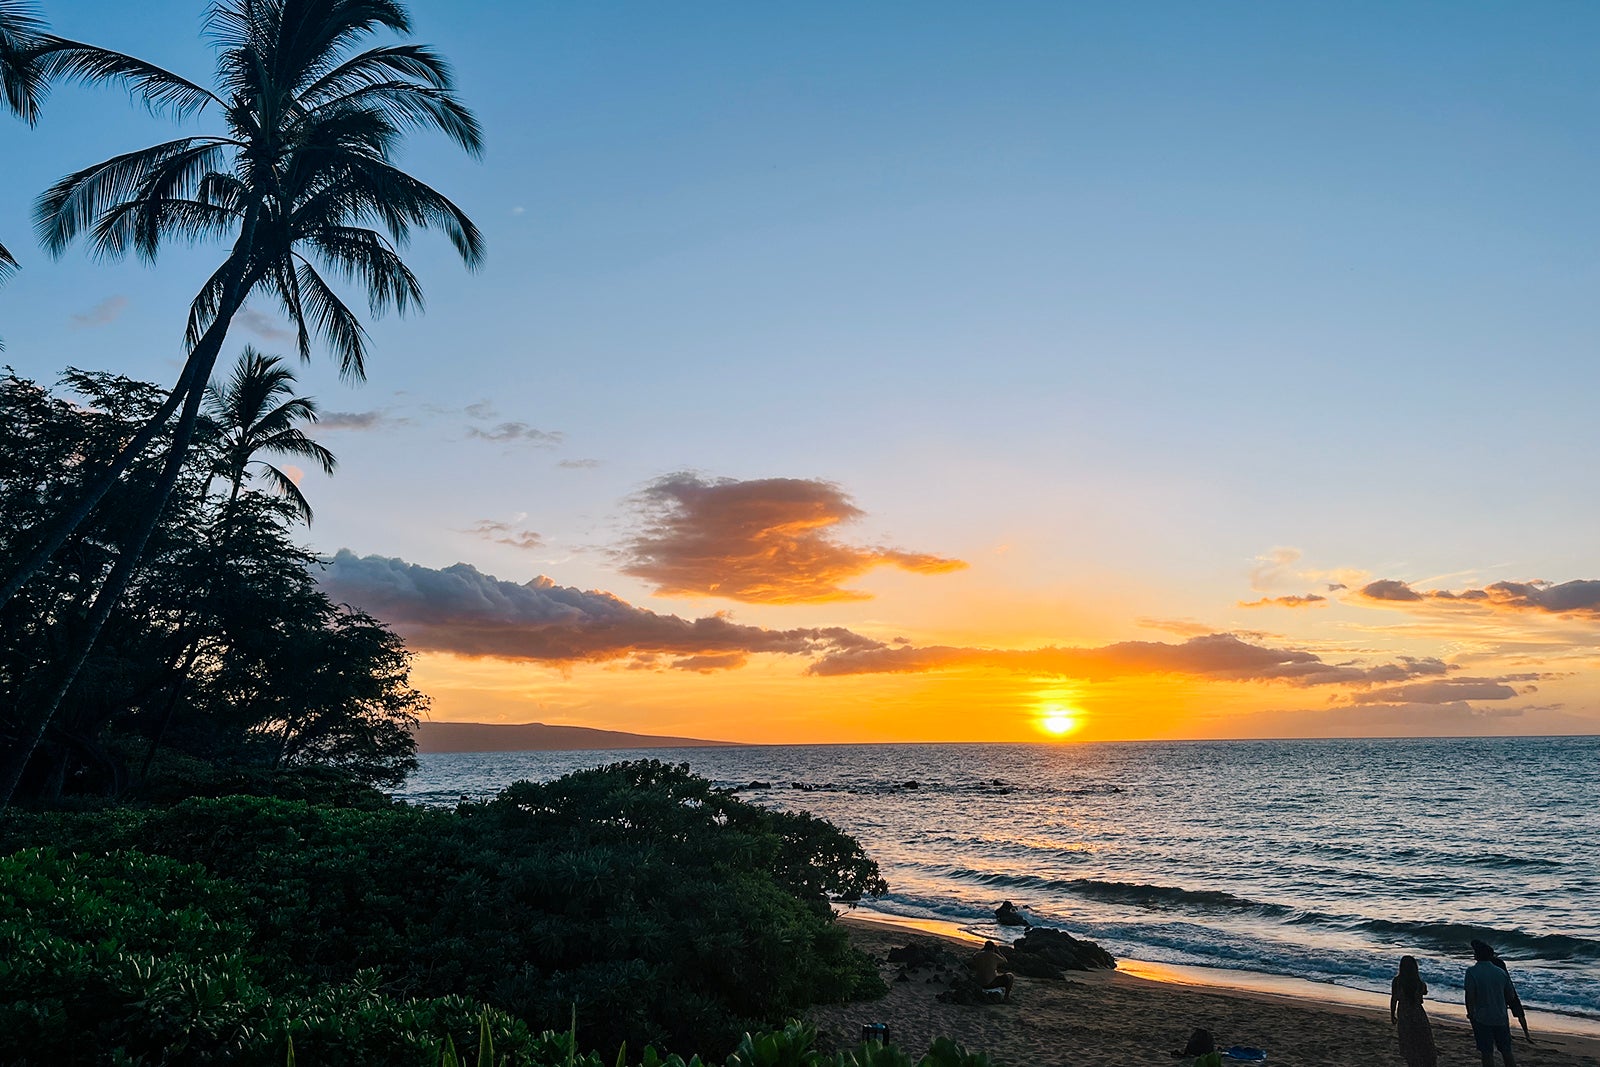 What it is like visiting Maui after the fires, and how one can assist Hawaii recuperate